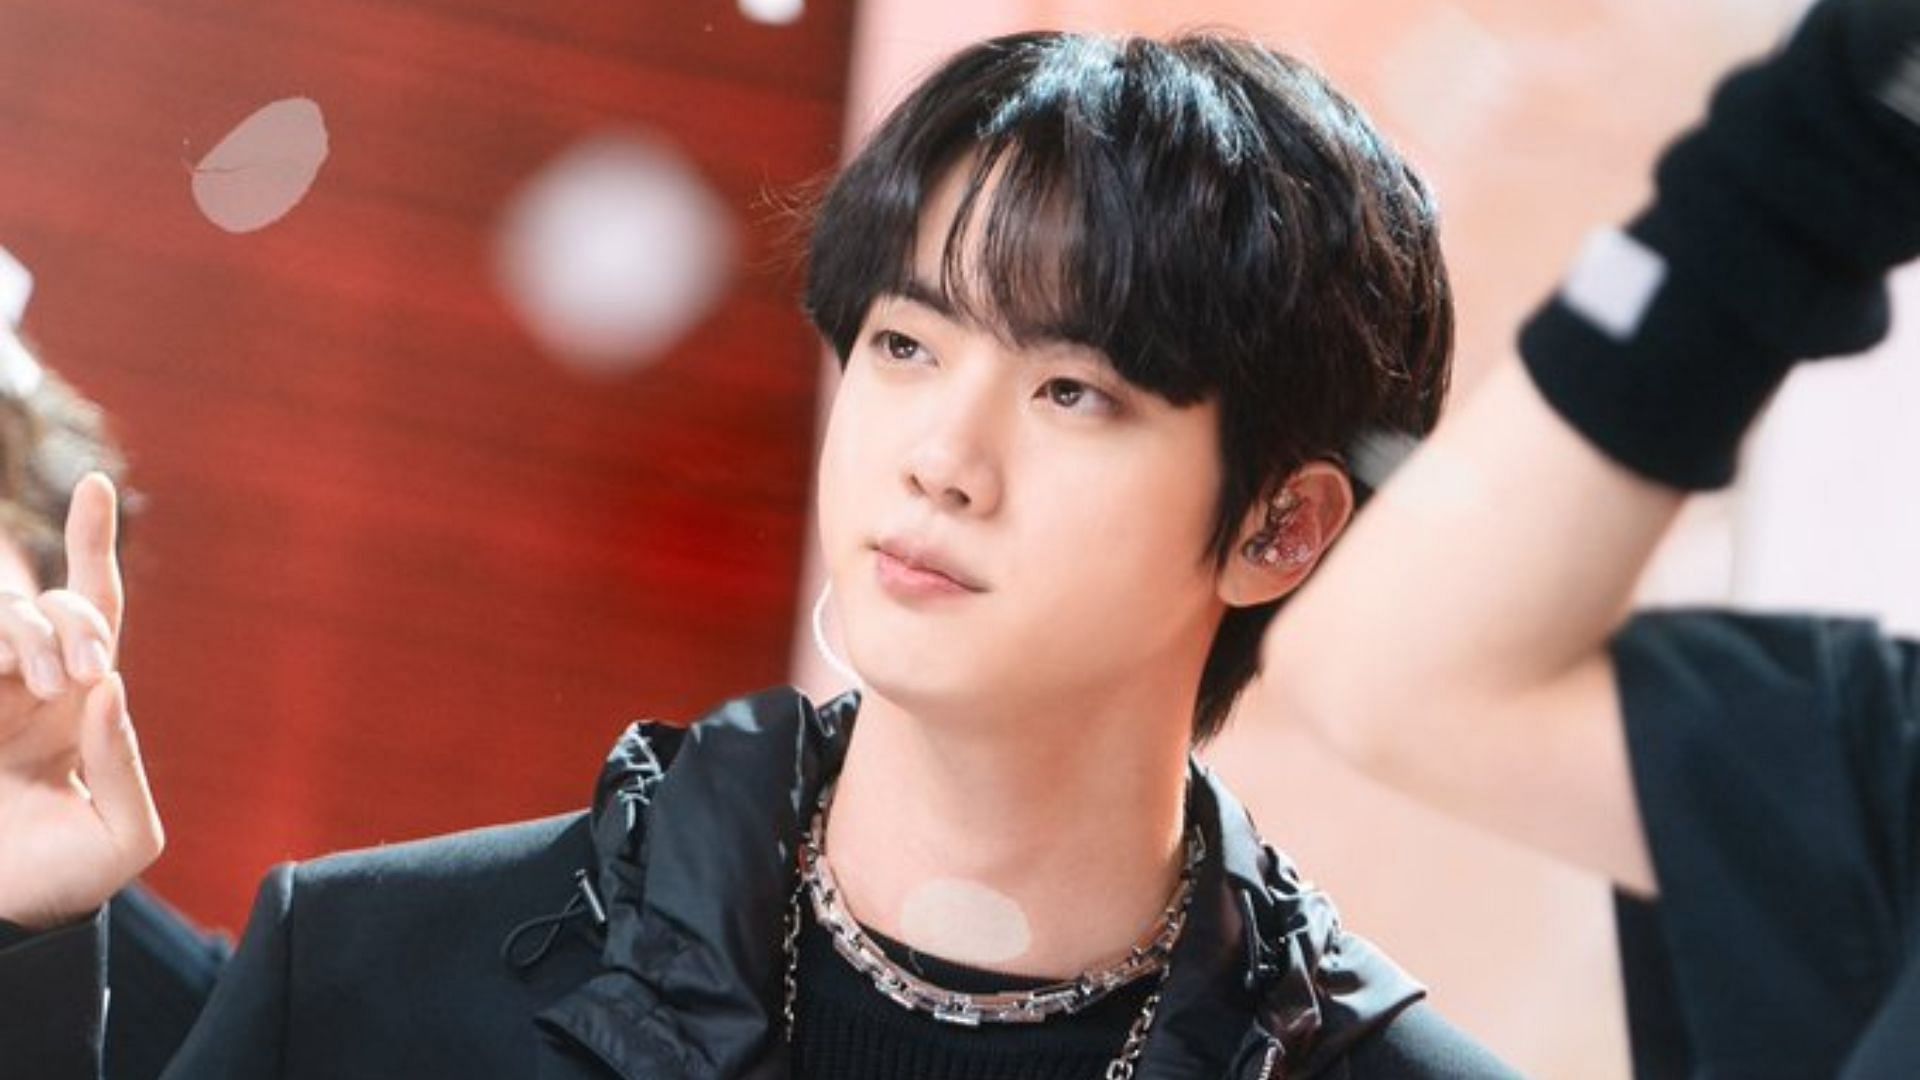 This is severe”: BTS' Jin's fans express shock over a young female 